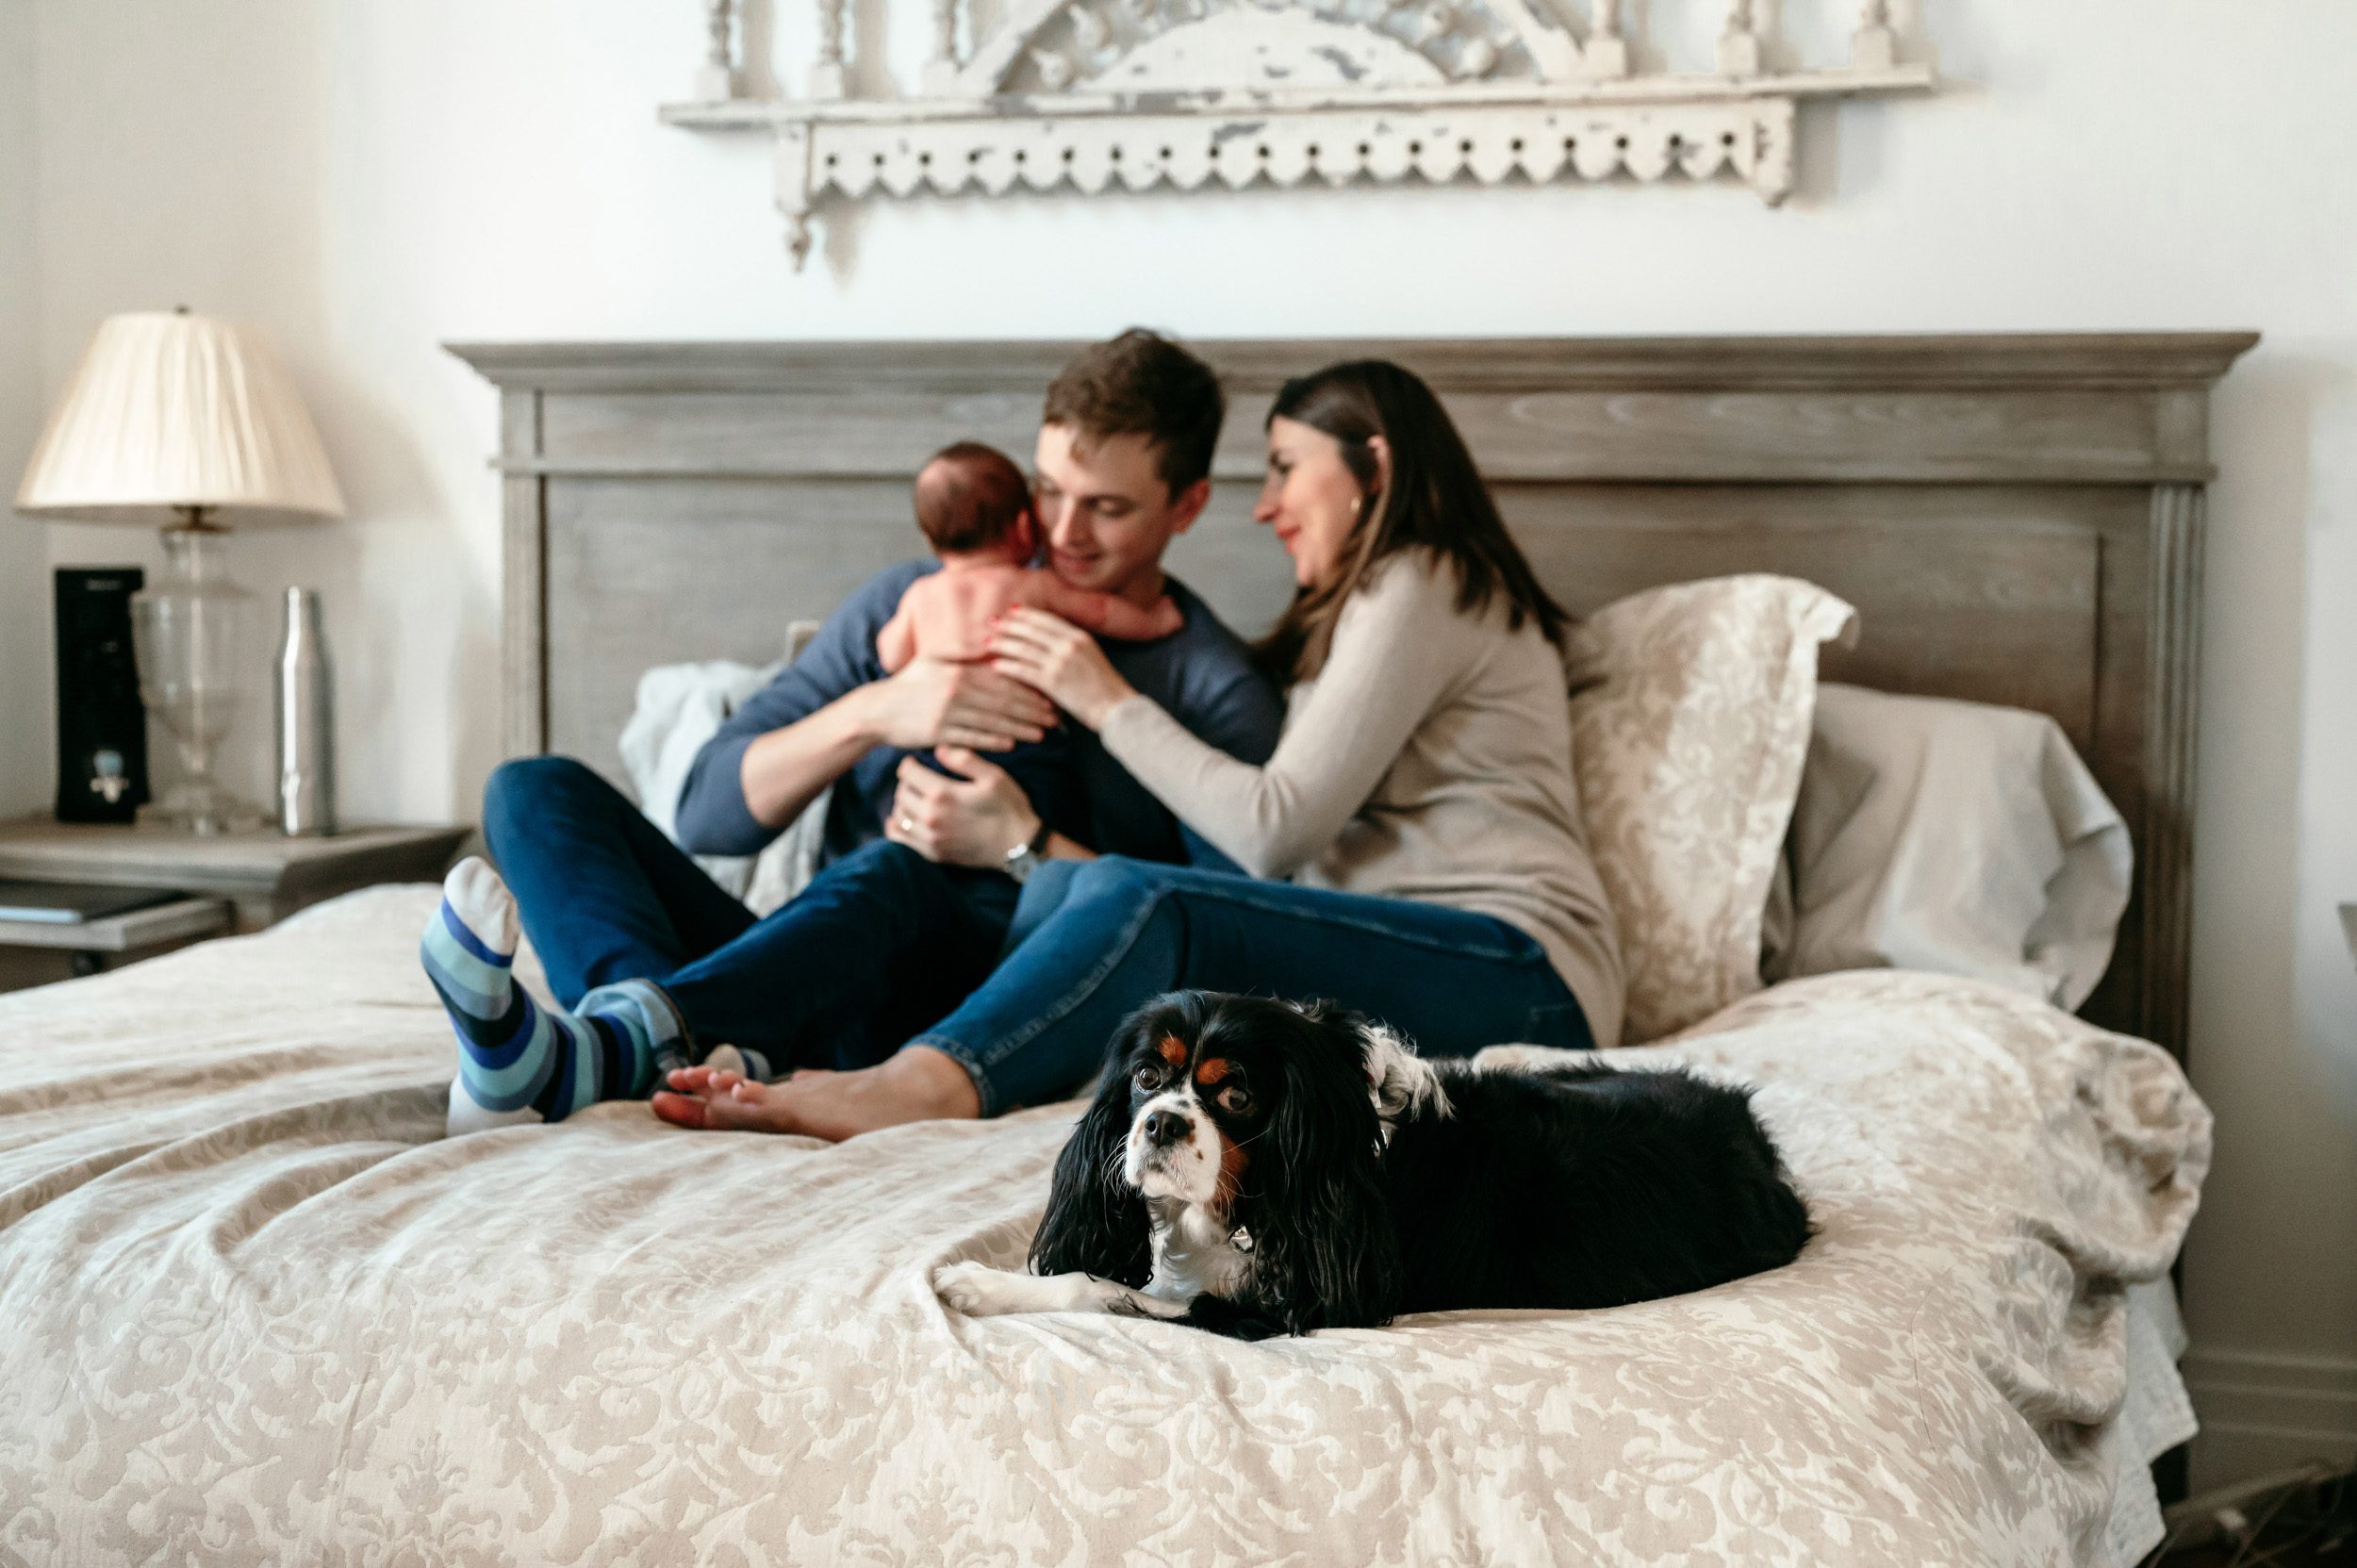 A pet dog laying on the foot of a bed while new parents snuggle with their newborn son in the background during a natural newborn photo session